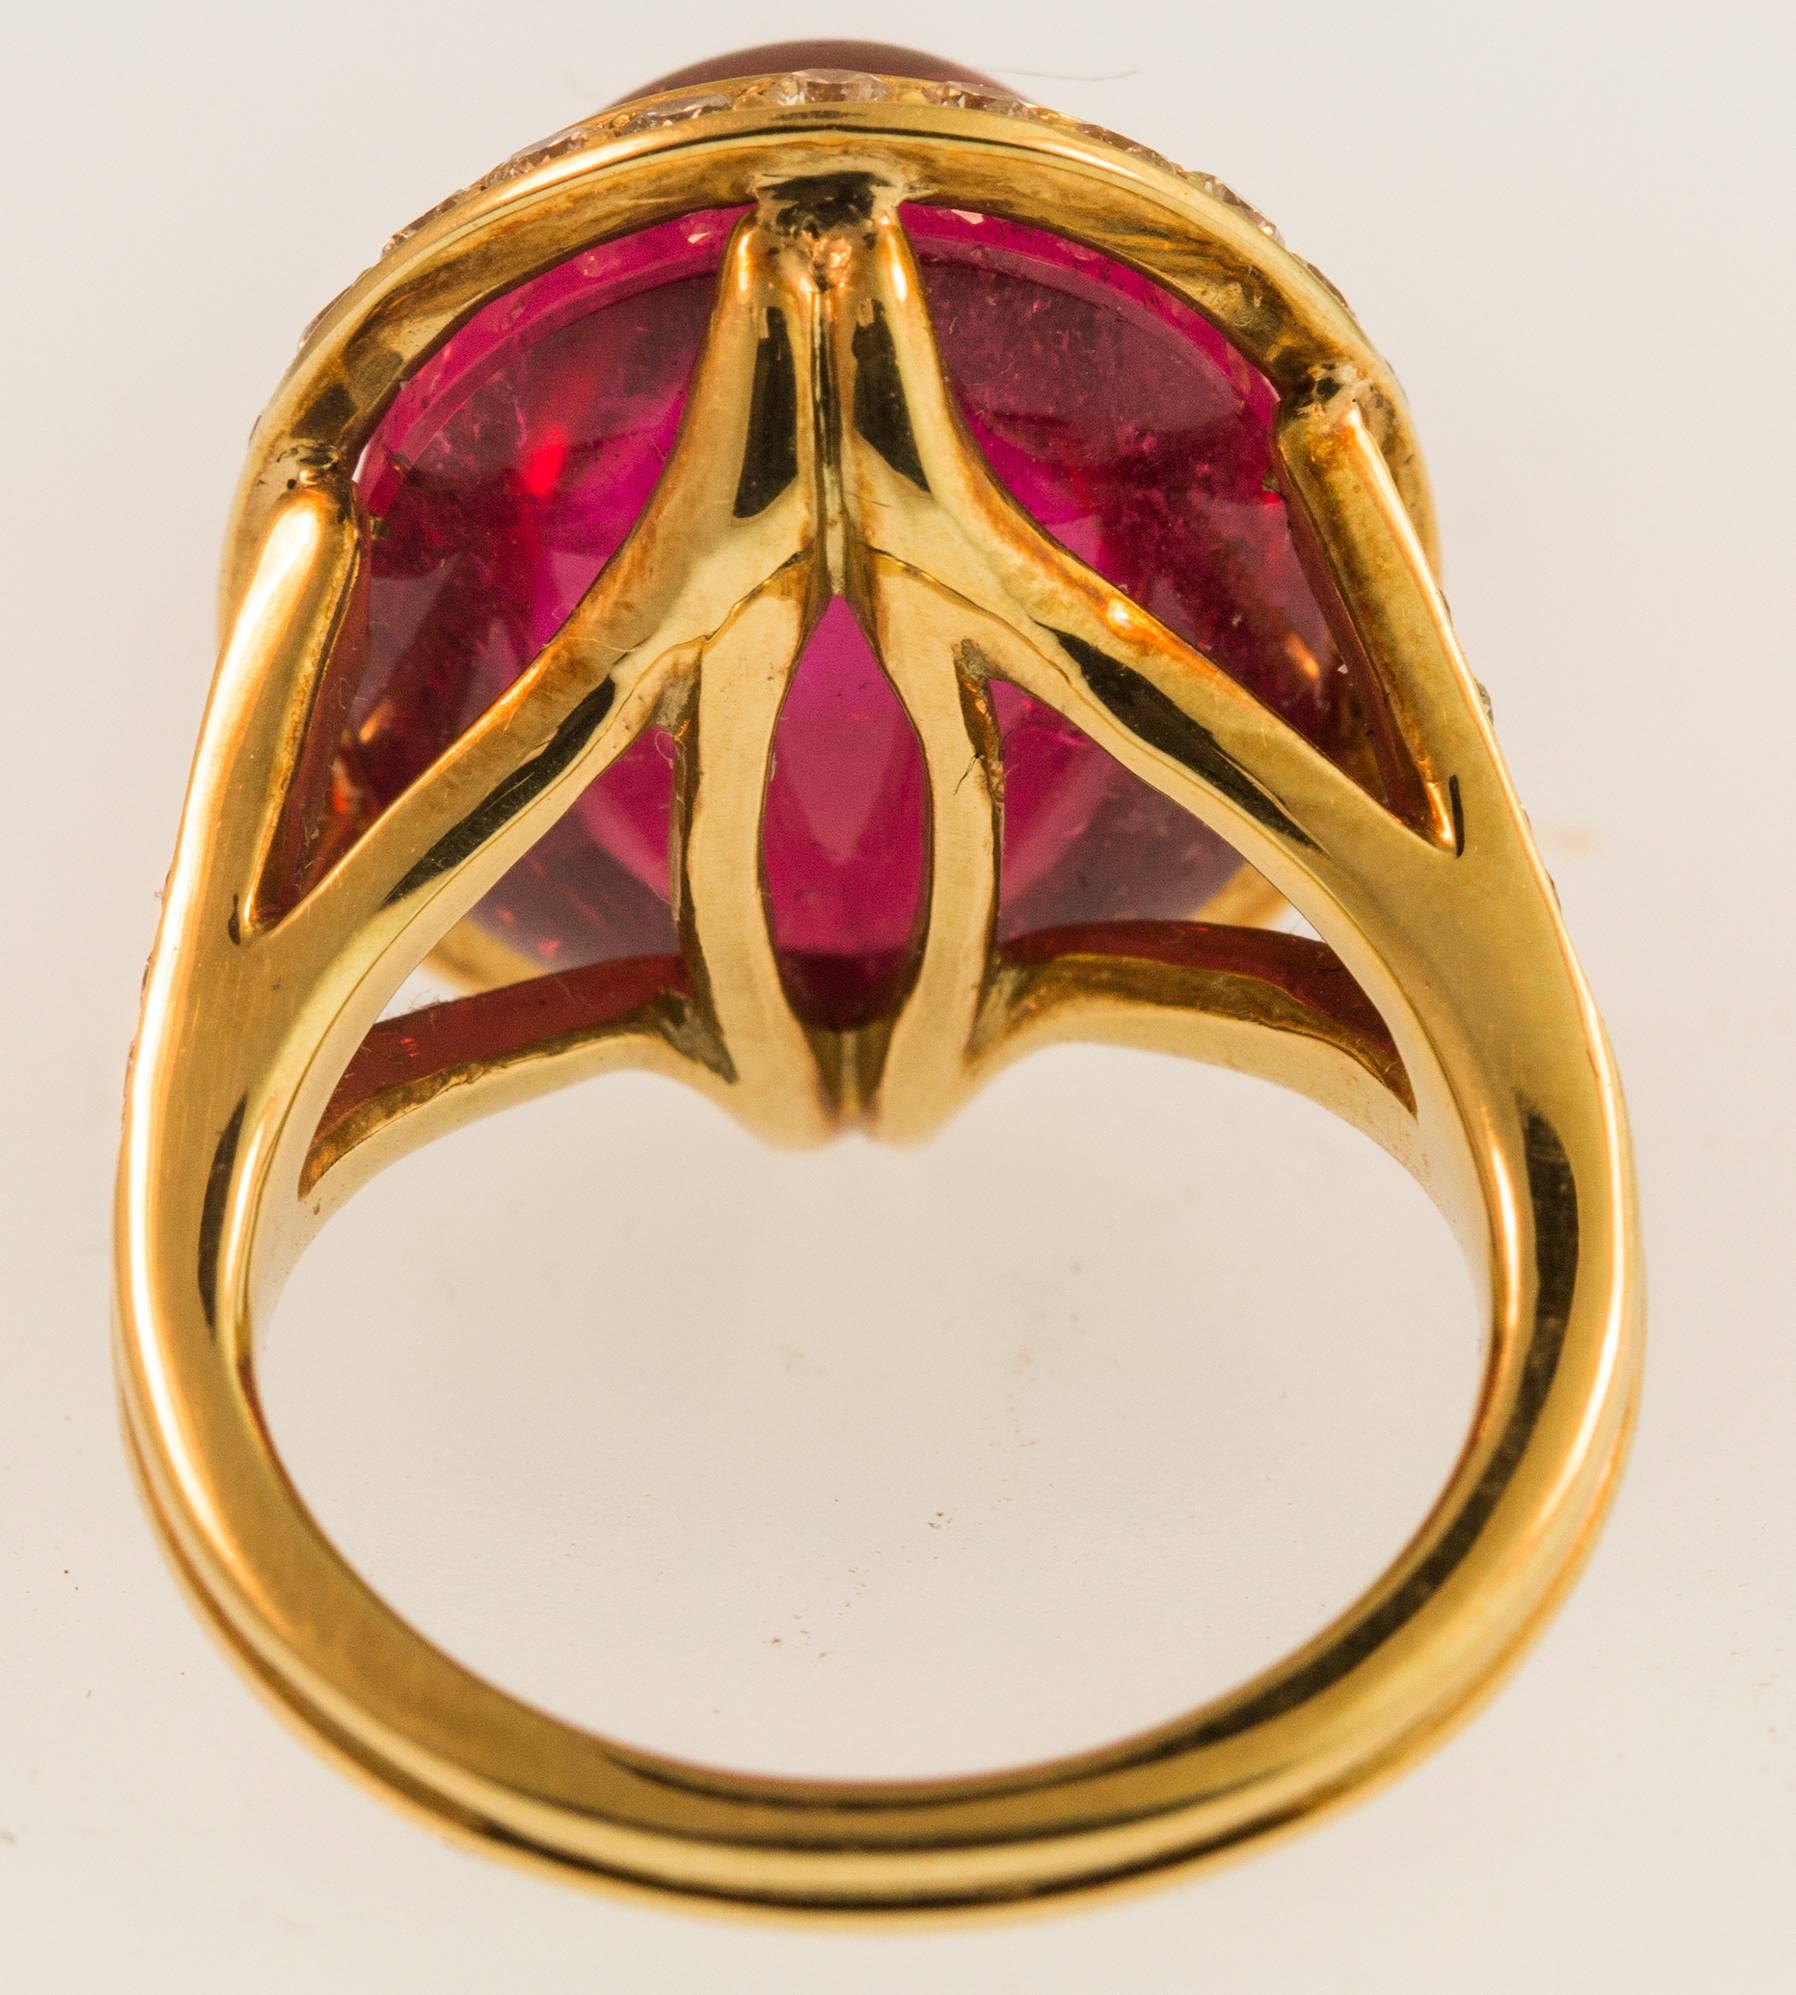 Centering a Beautiful 16.90ct oval Cabochon Rubellite from Brazil; measuring approx. 15.8 x 13.0mm surrounded by round brilliant cut diamonds, 0.96tctw; mounting in 18K yellow gold; Ring size: 6. Complimentary ring sizing available. Classic and